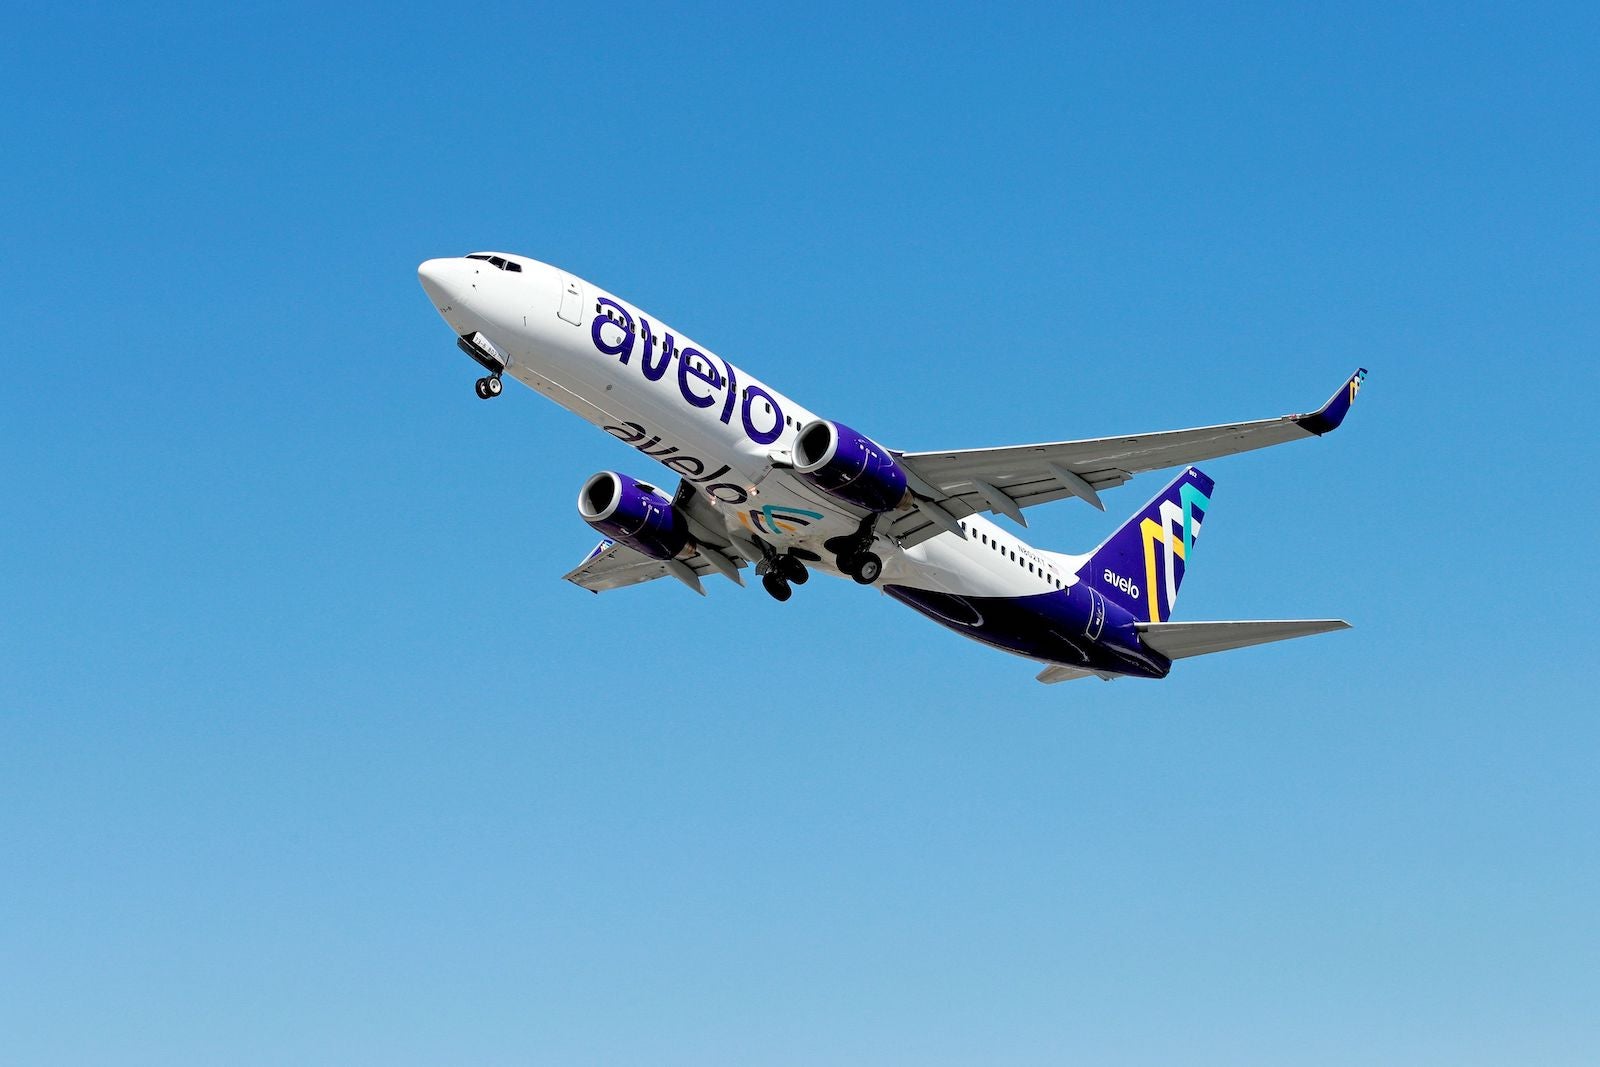 Book one-way fares starting at $36 on Avelo through next week GettyImages 1315025391